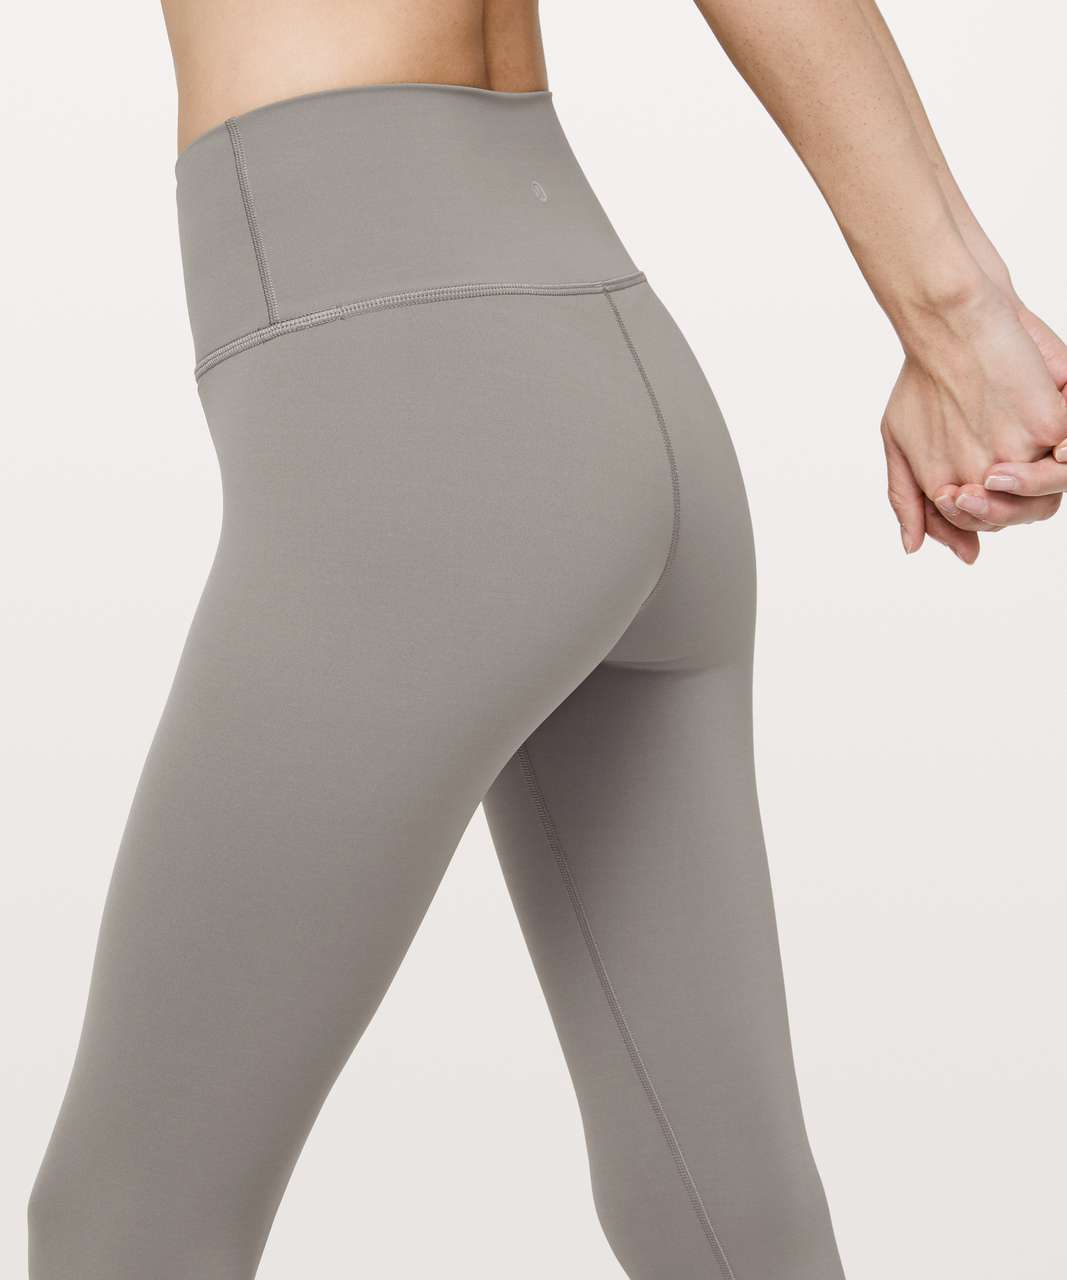 Lululemon Wunder Under High-Rise Tight 31" *Full-On Luxtreme - Carbon Dust